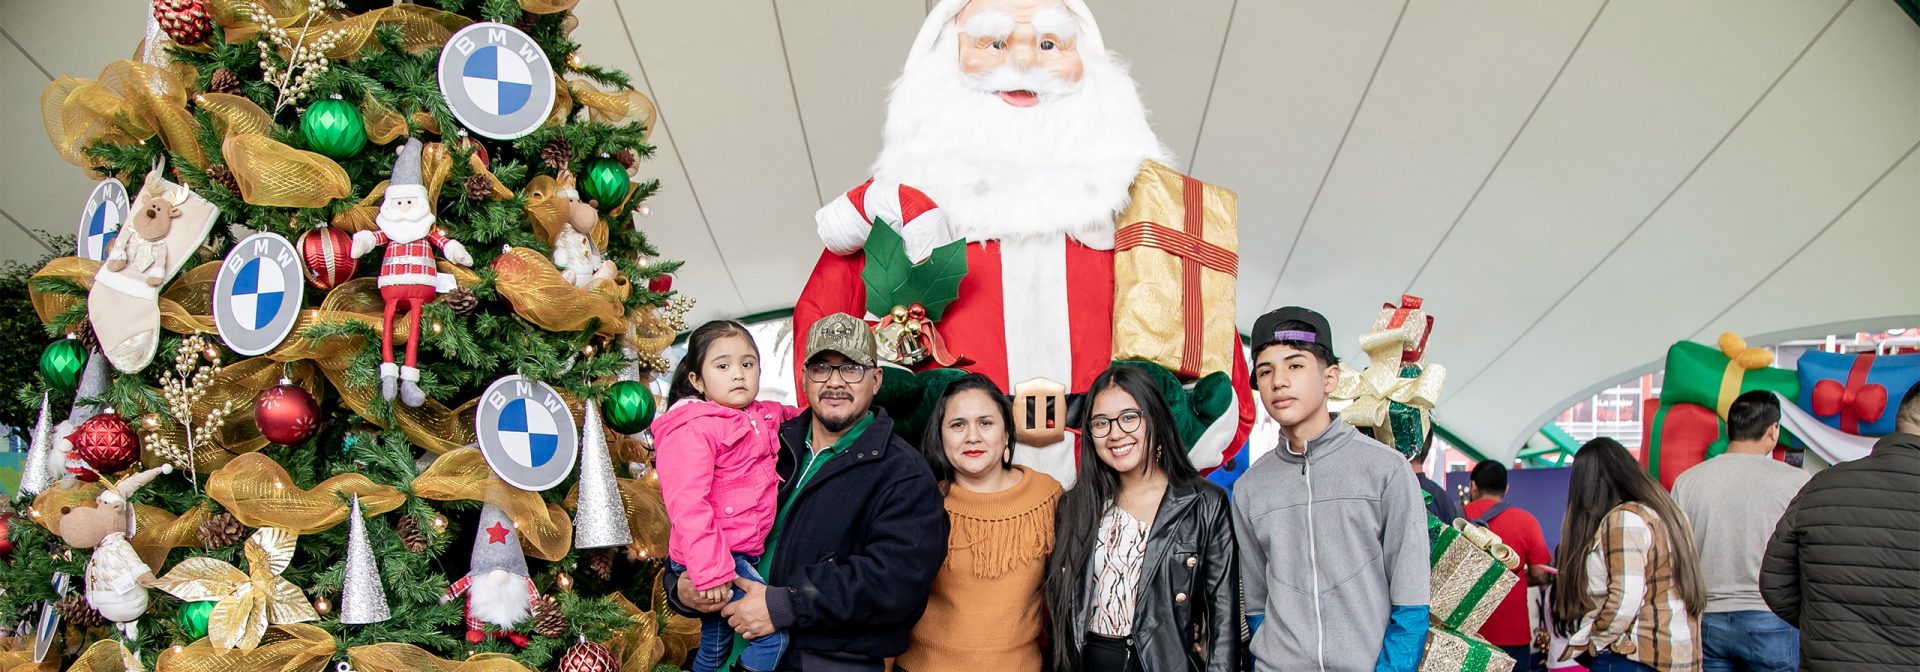 Family standing in front of Santa 